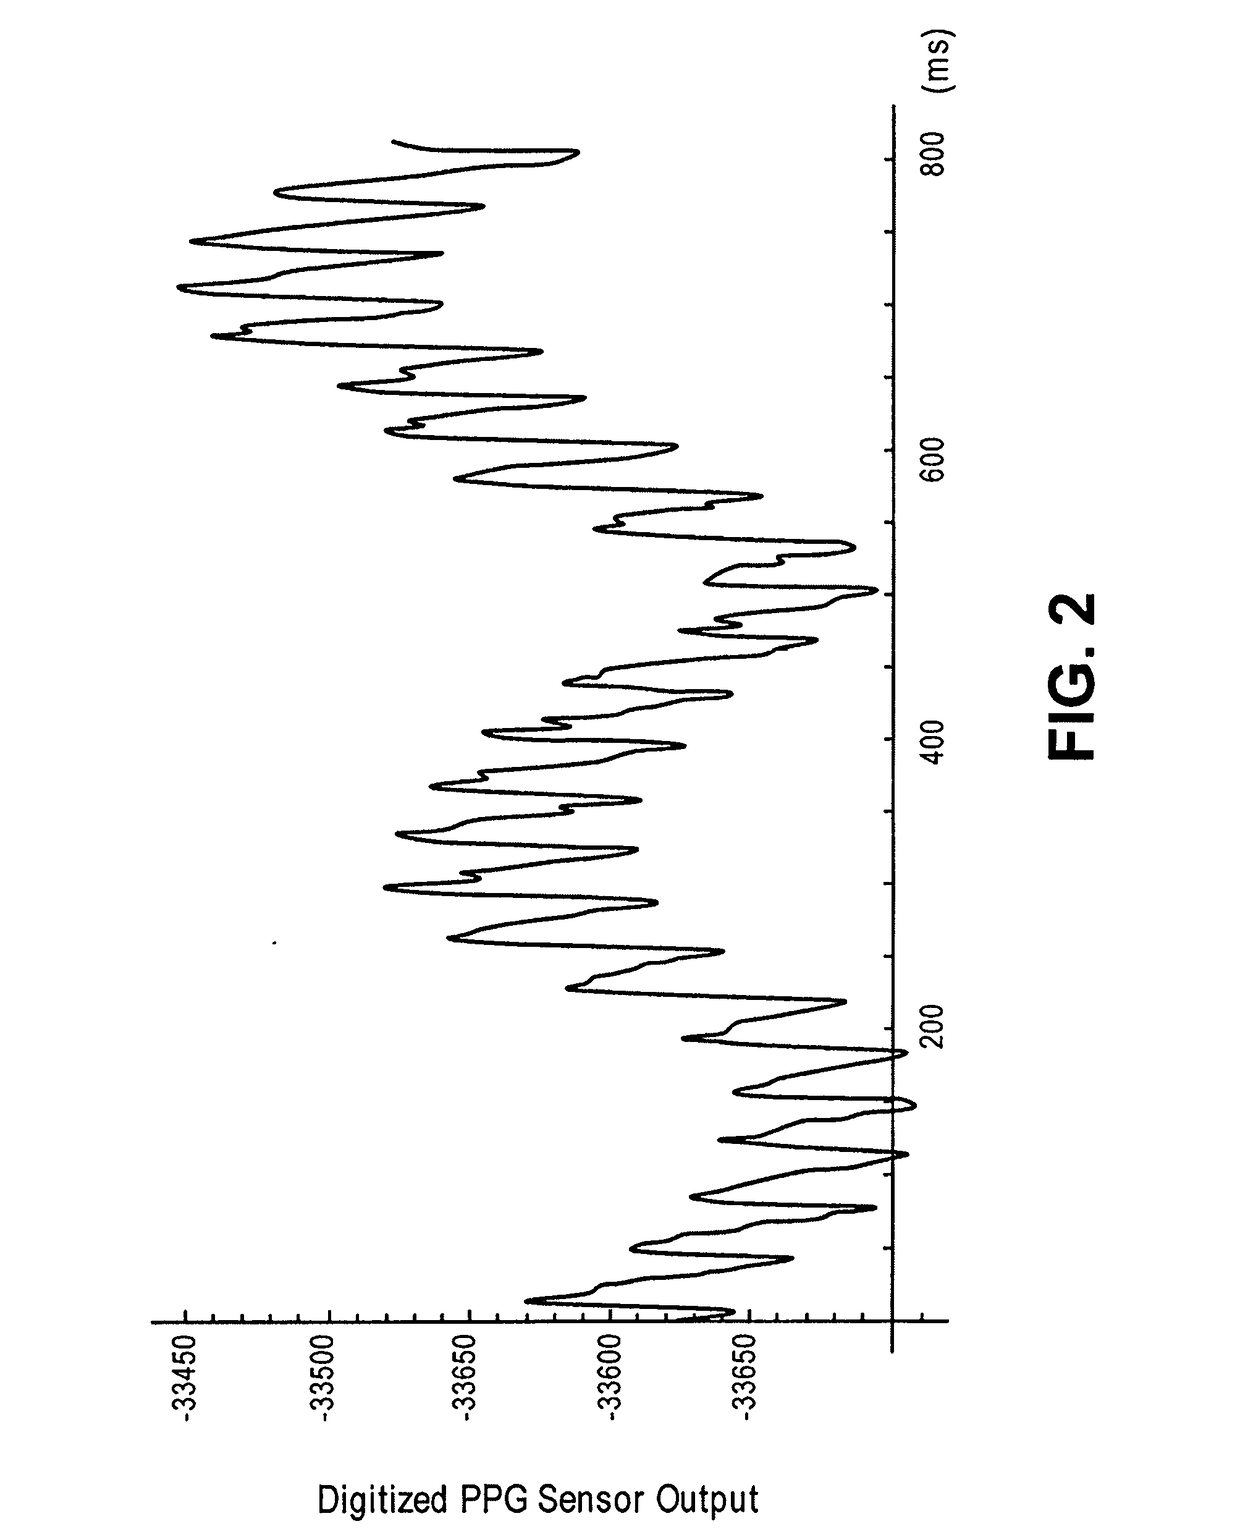 Method and apparatus for real-time non-invasive optical monitoring of decompression sickness state